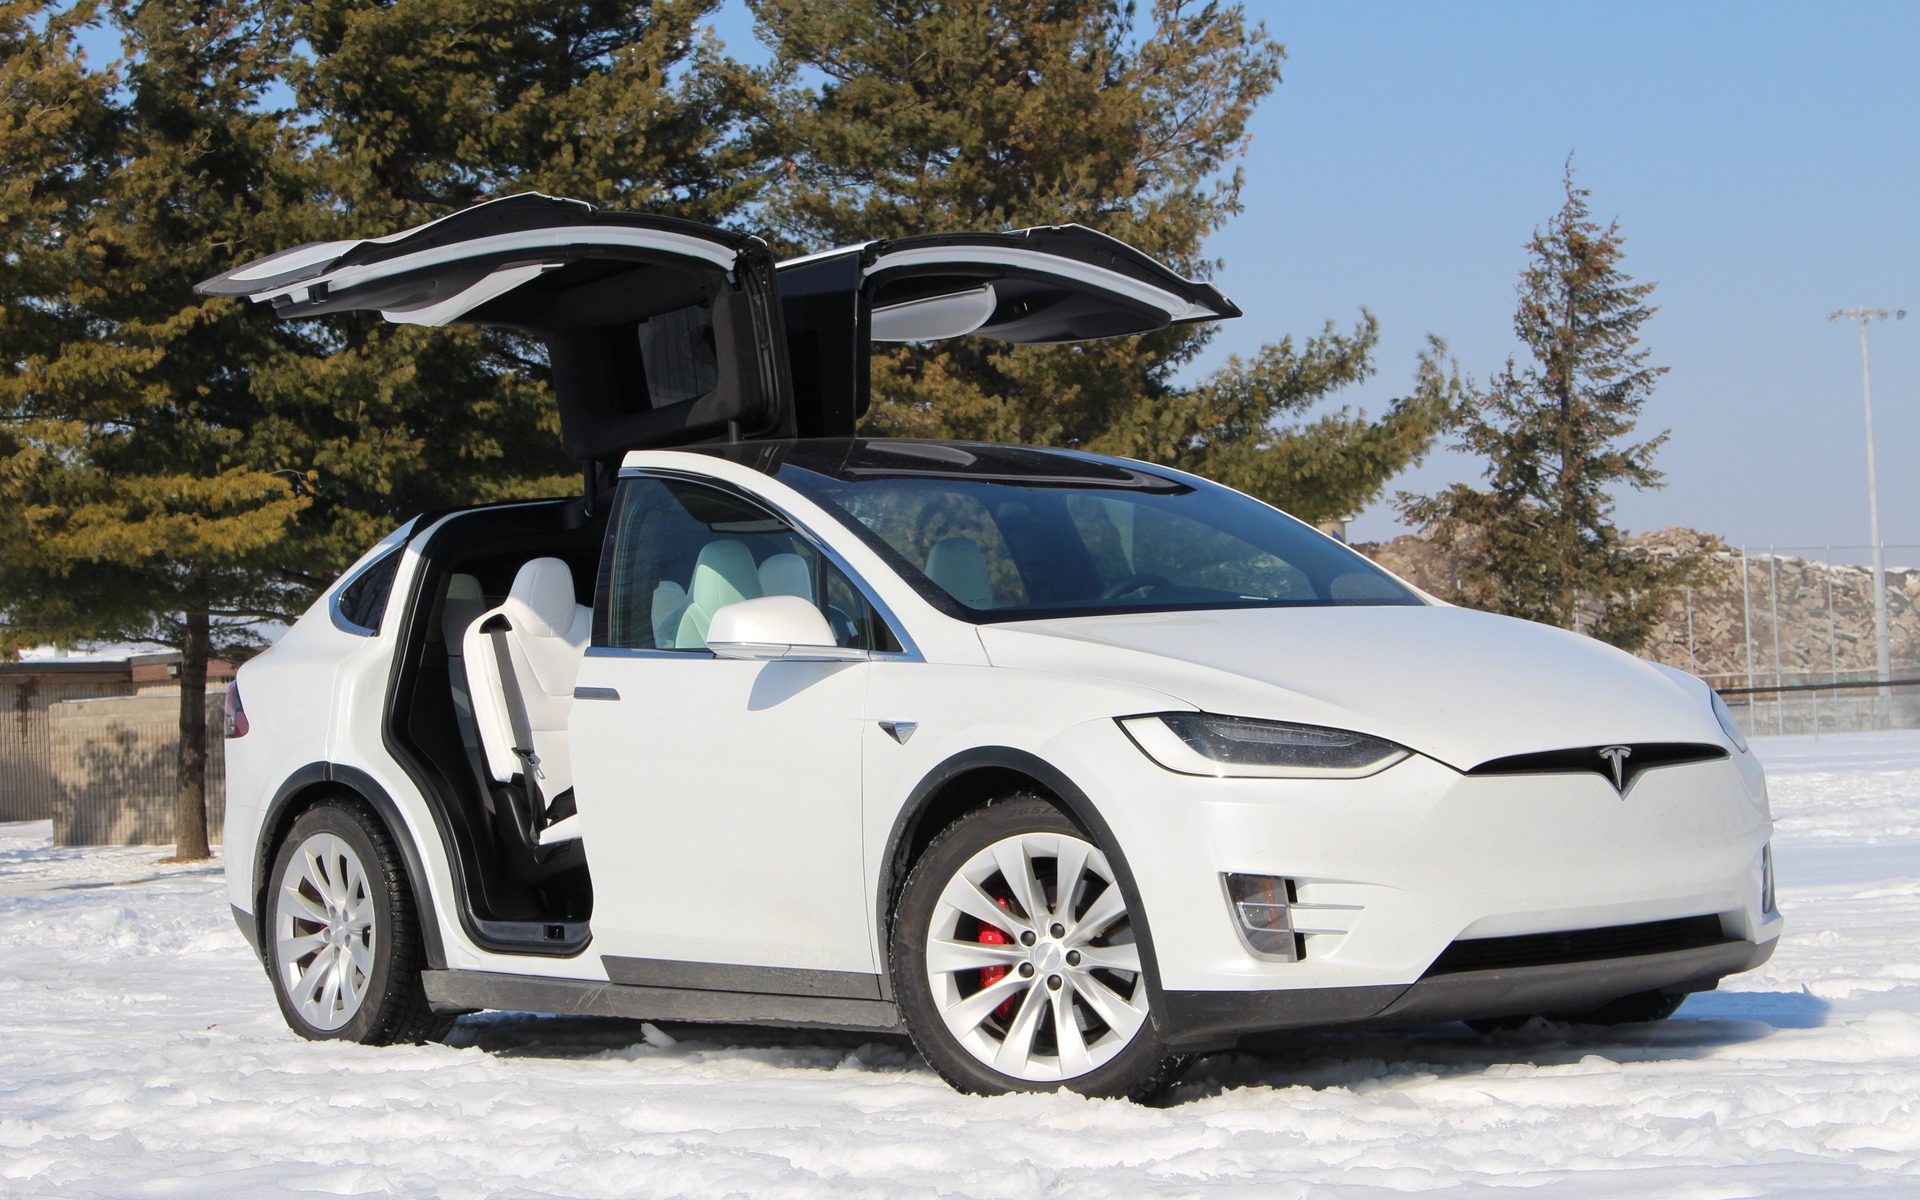 Front-angled view of a white Tesla Model X with doors open